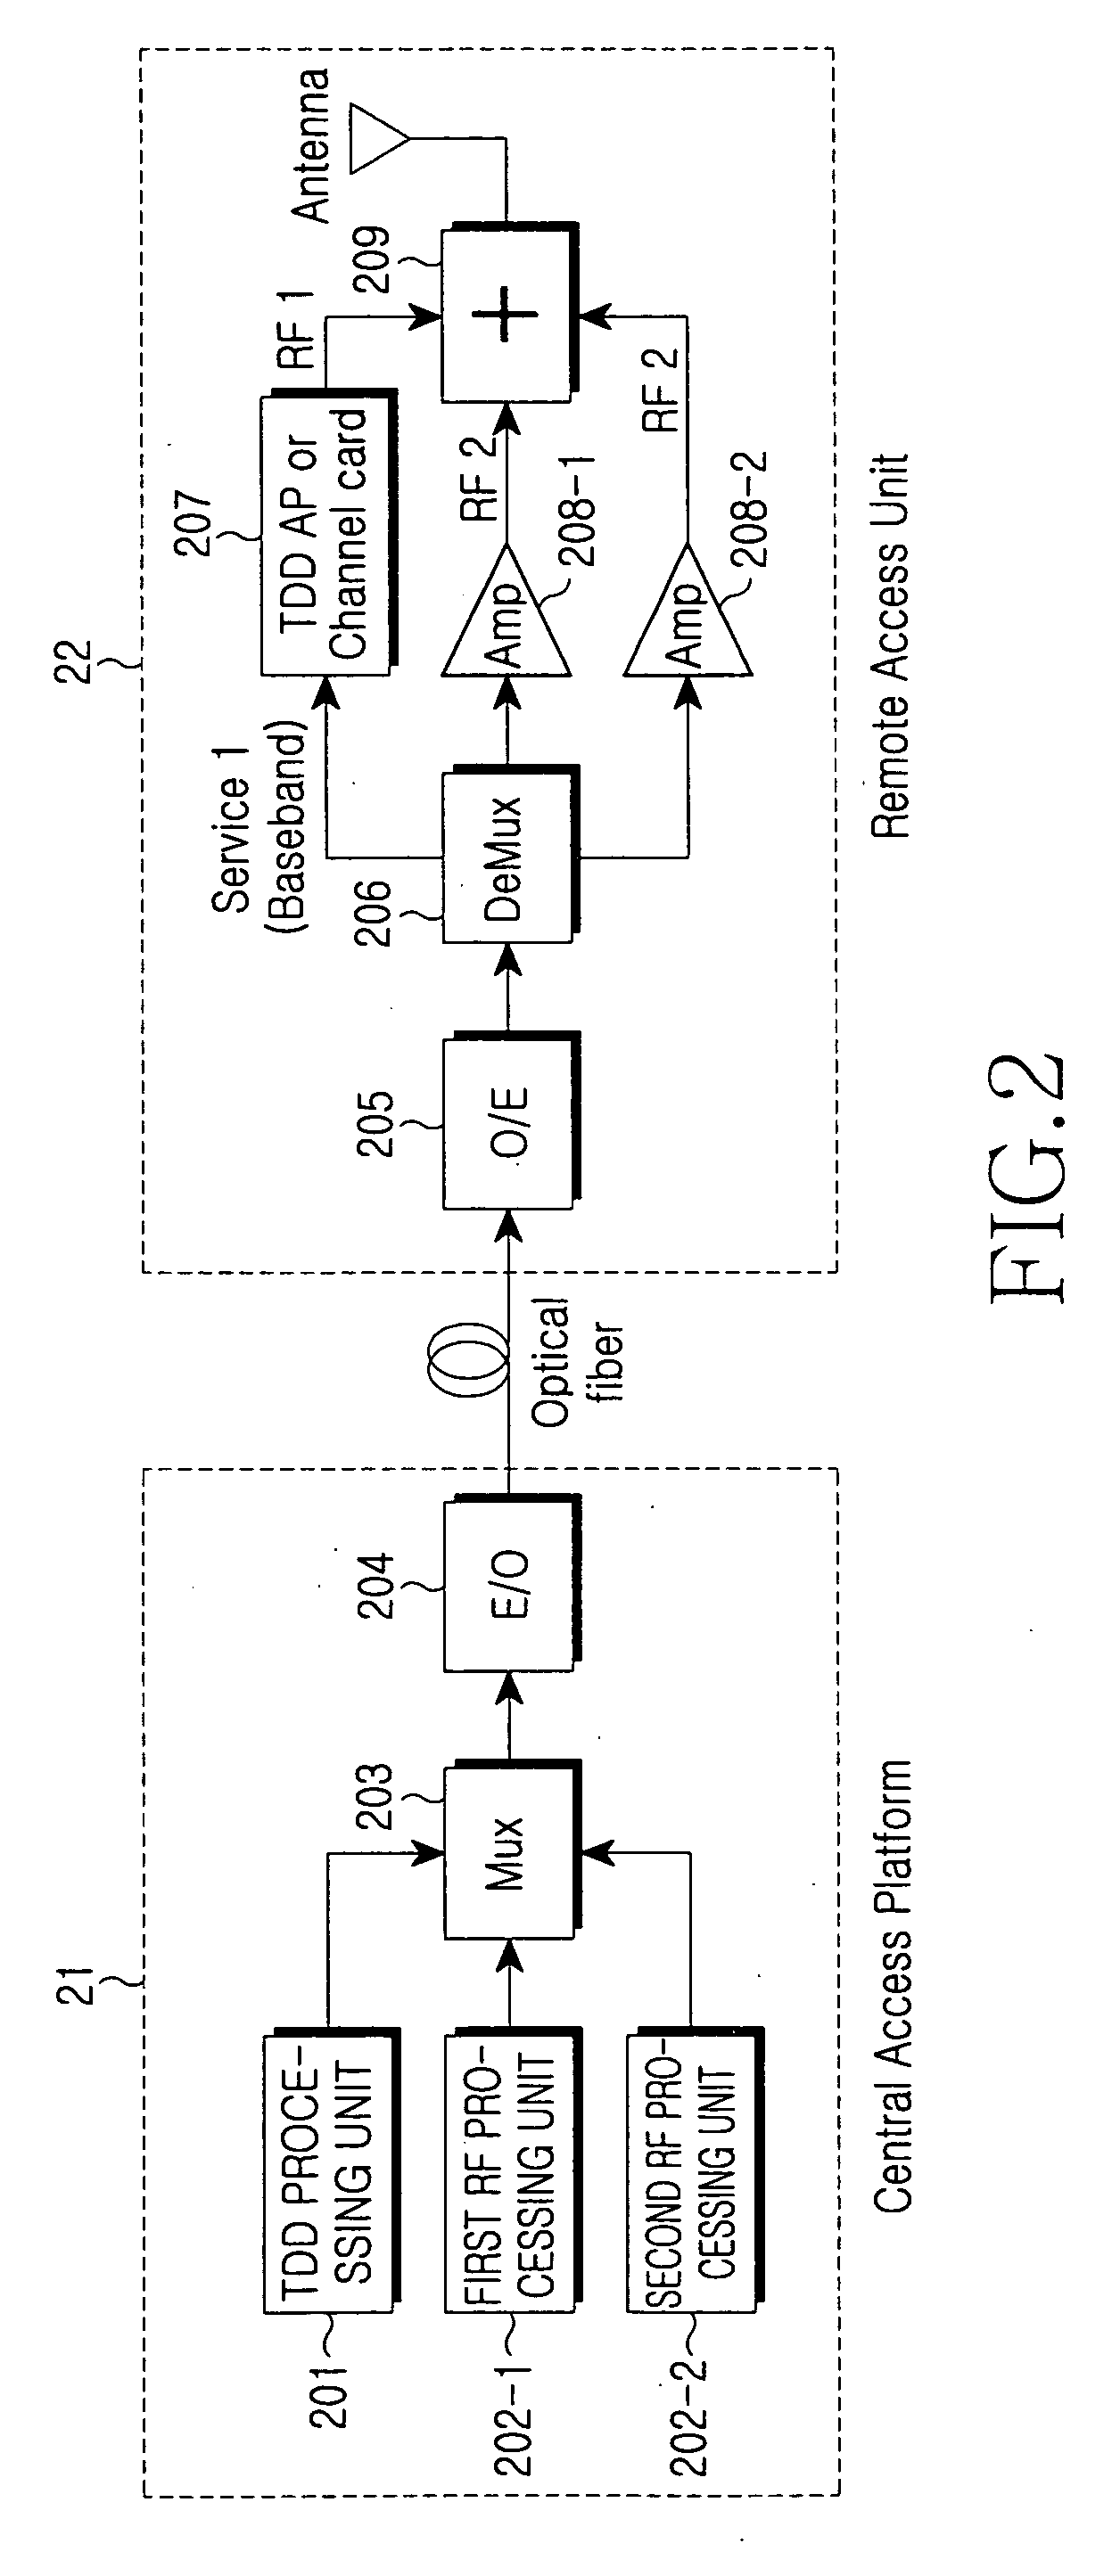 ROF link apparatus capable of stable TDD wireless service